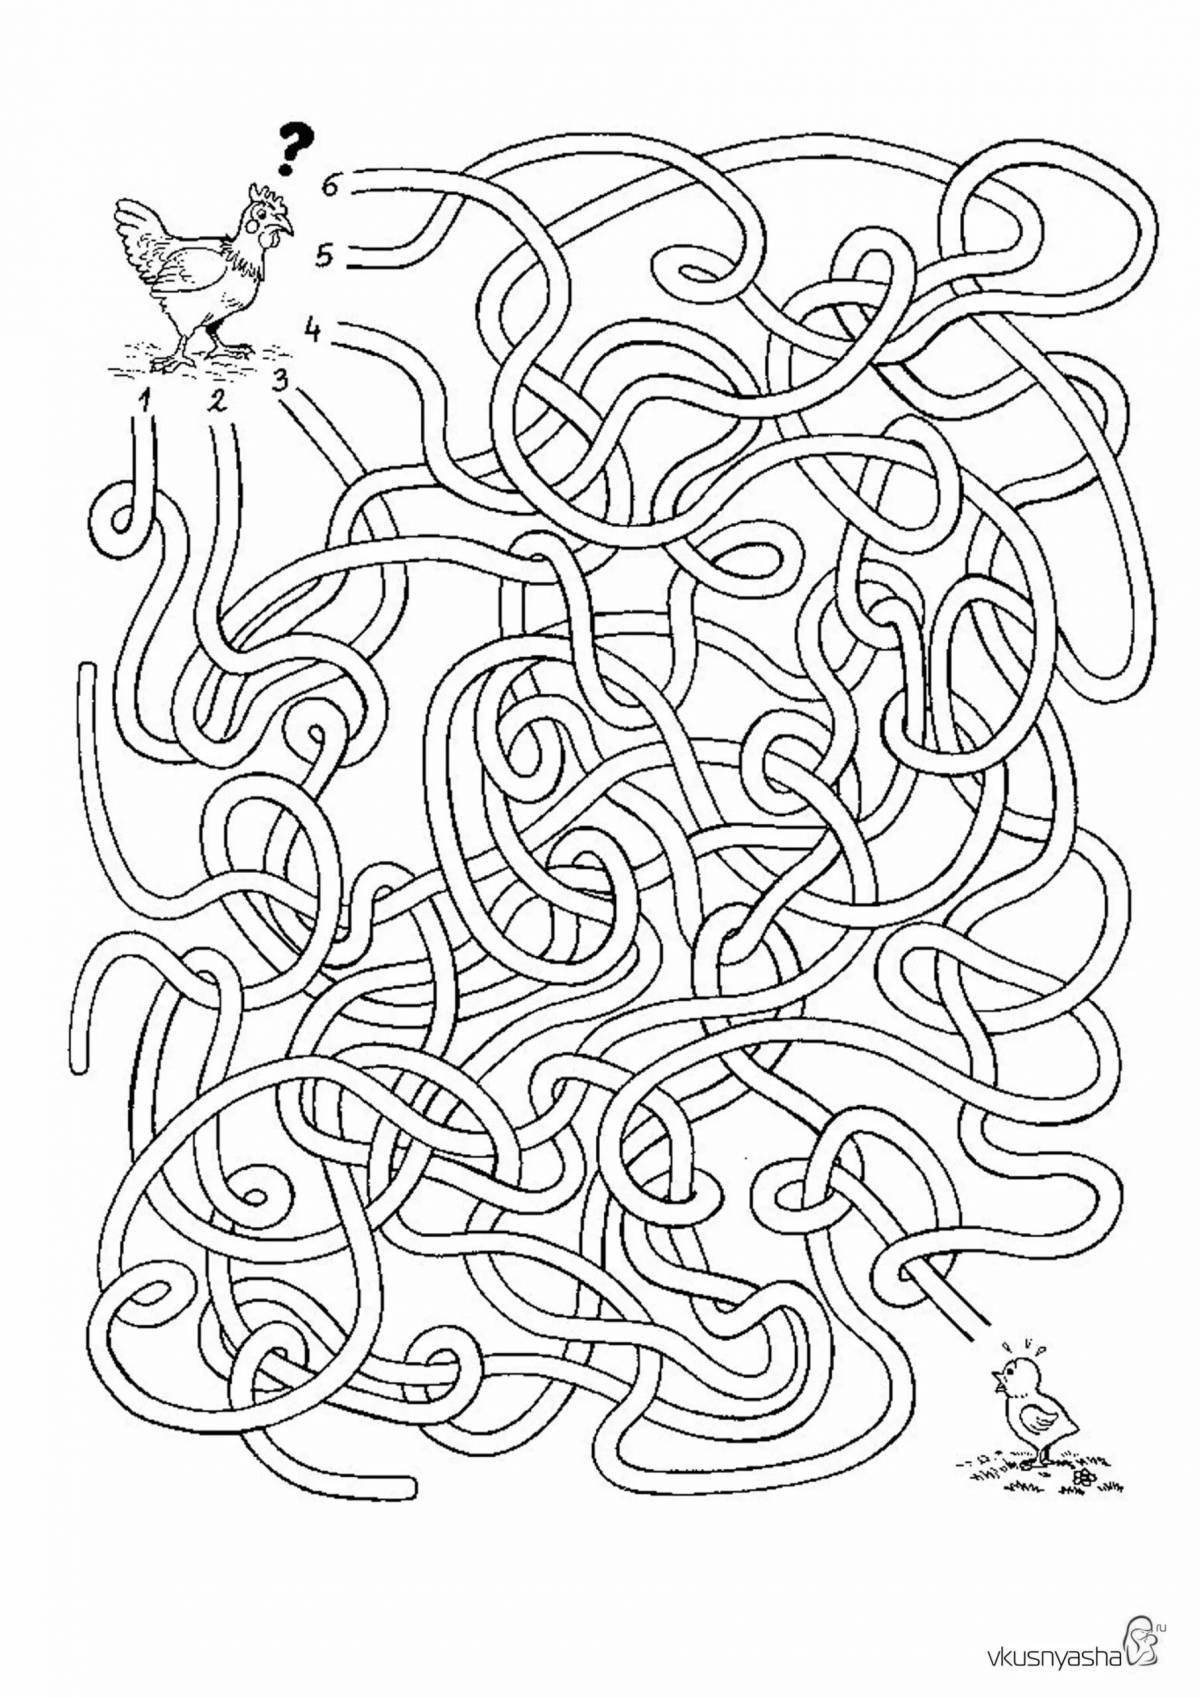 Colourful coloring maze for children 9-10 years old